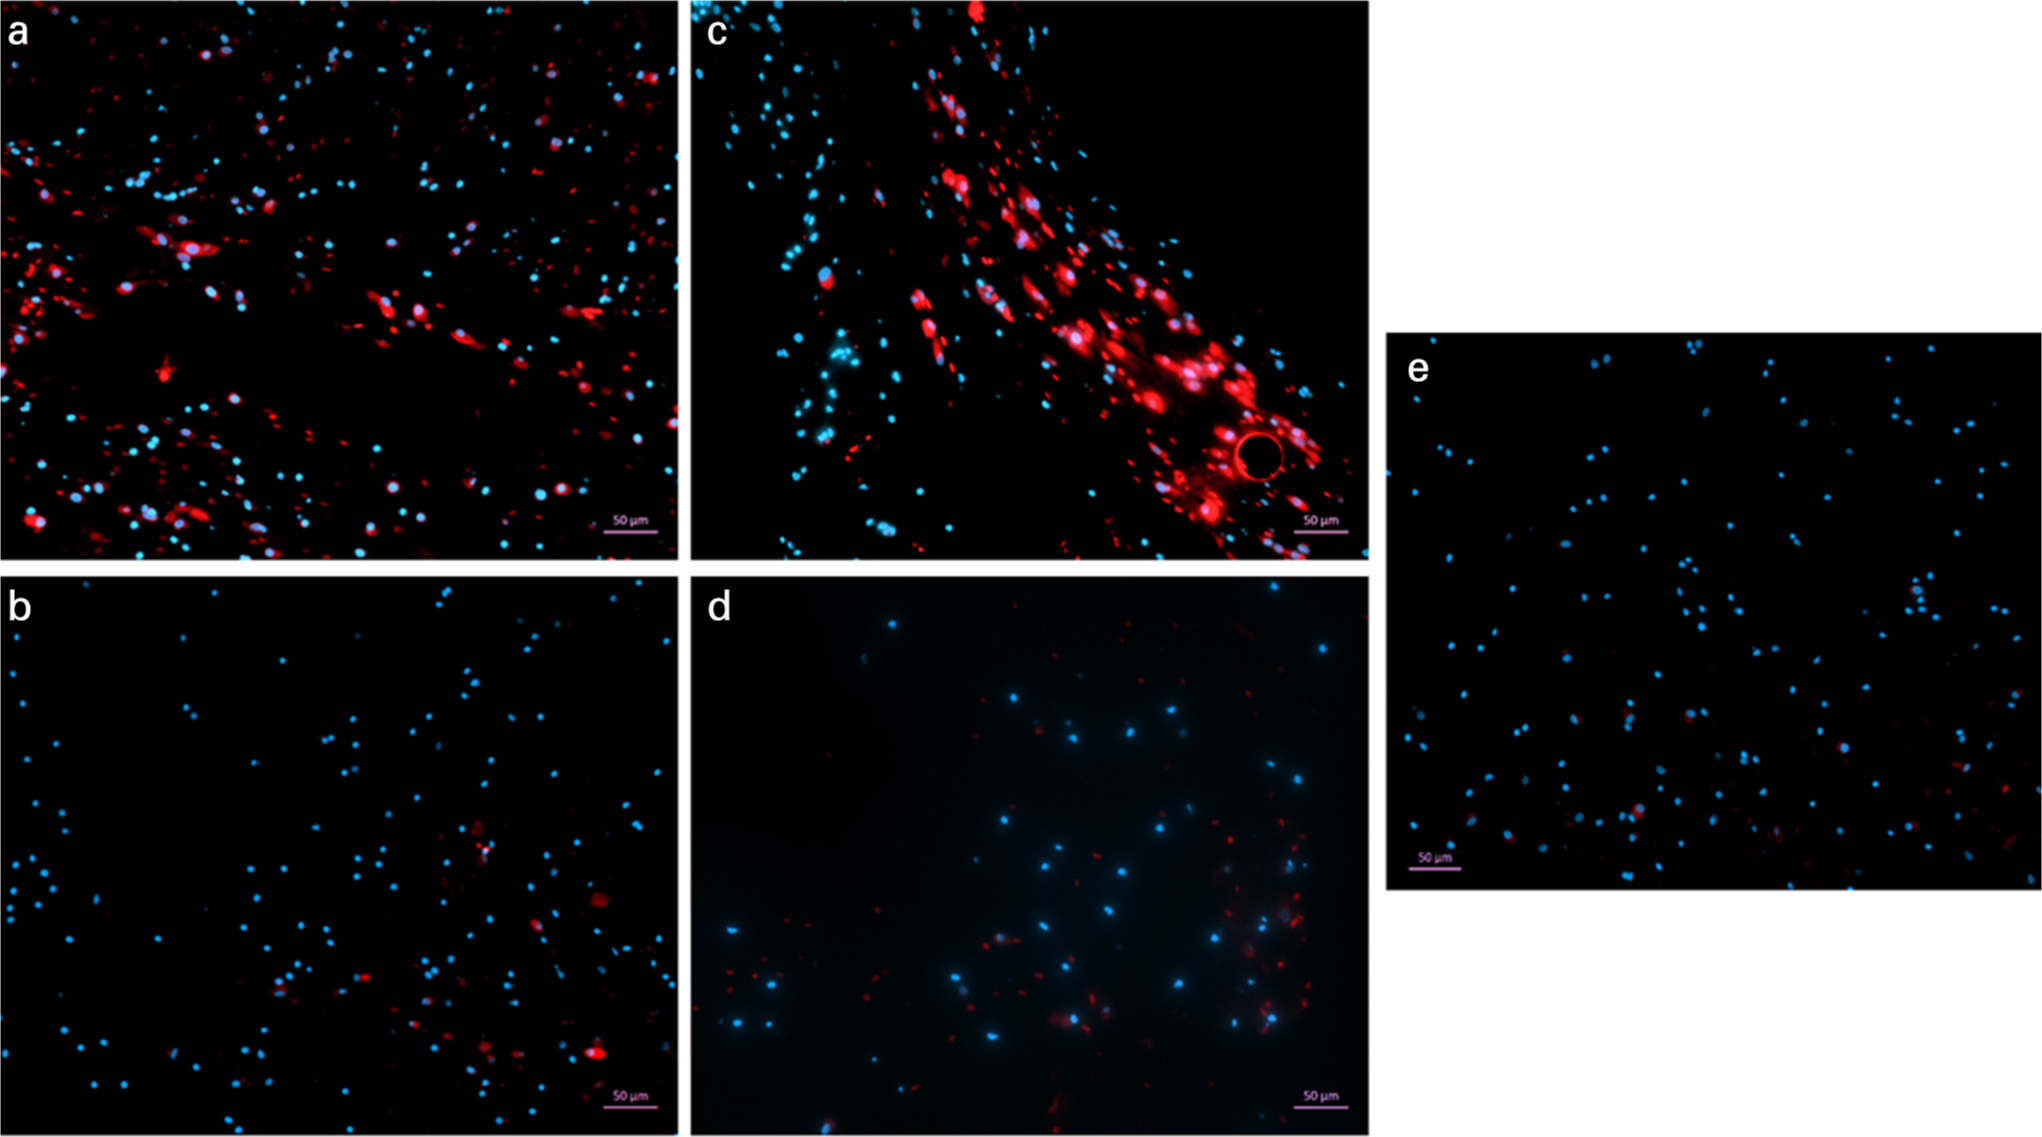 Fig. 5 
            Immunofluorescence staining of mesenchymal stem cells (MSCs) in the gel after 14 days in 2.5 times concentration gels. The gels containing bone marrow MSCs were stained for CD29-APC (A) and CD90-APC (C). Gels without any cells were also stained for CD29 (B) and CD90 (D). All gels were counter-stained with DAPI and viewed at a magnification of ×5. A control gel containing MSCs was stained with DAPI only to establish any background staining. Spindle-shaped cells visible in the gel had stained positive for CD29 and CD90.
          